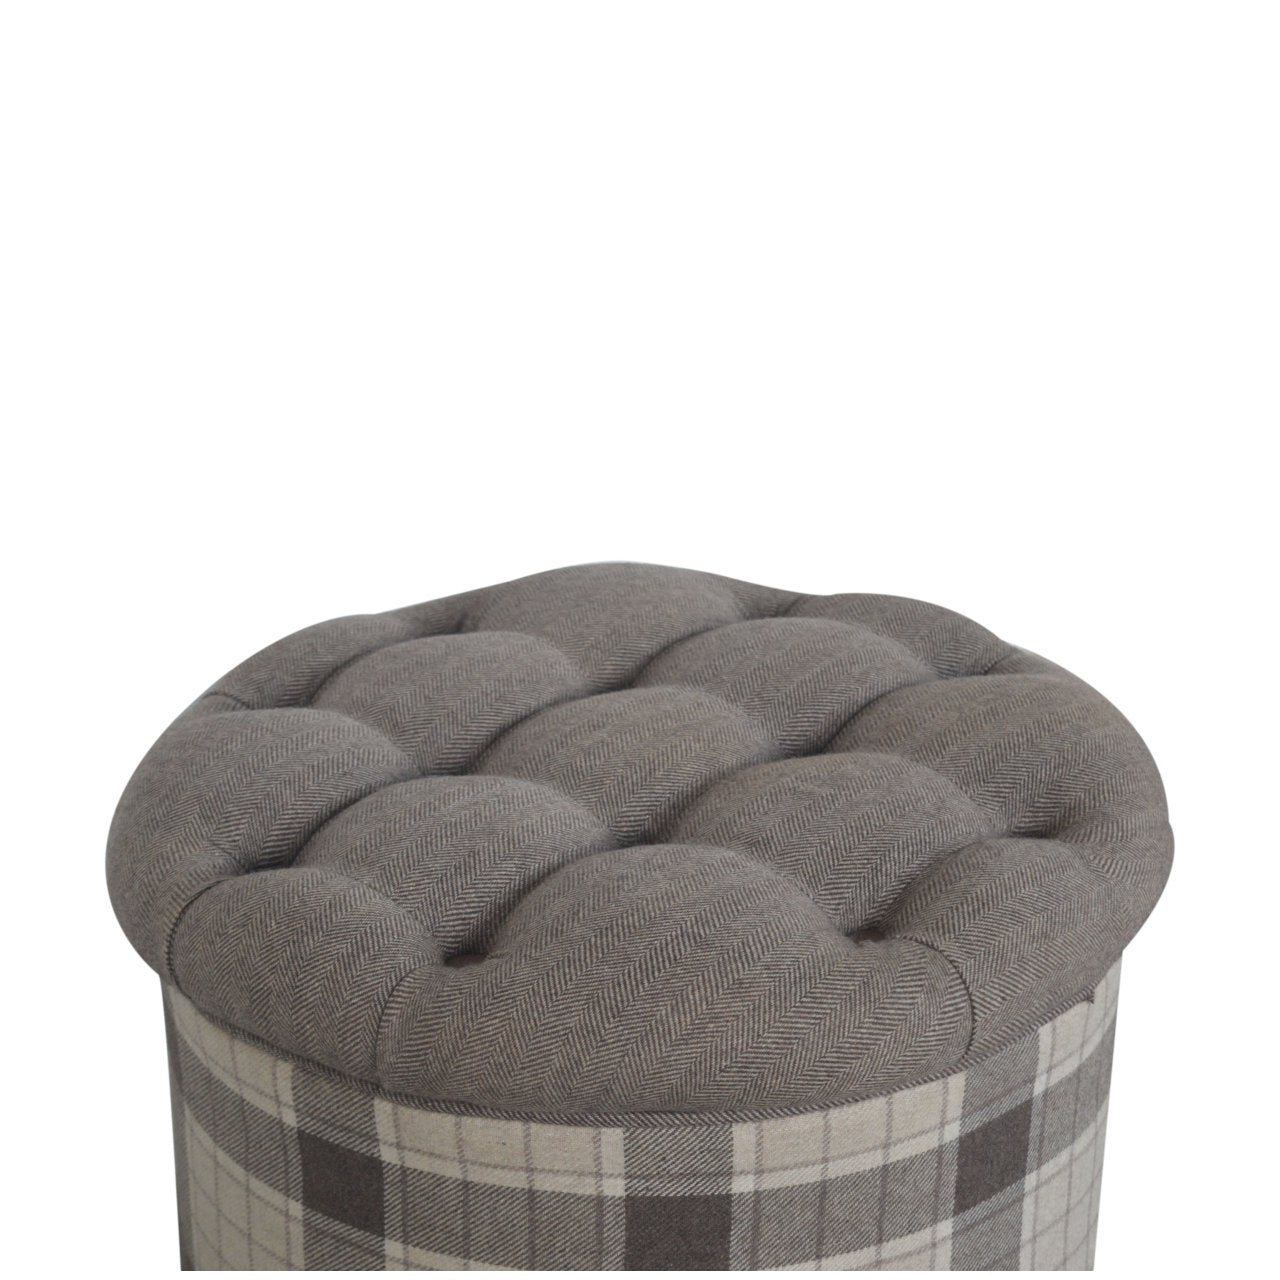 Solid Wood Deep Button Round Checked Footstool